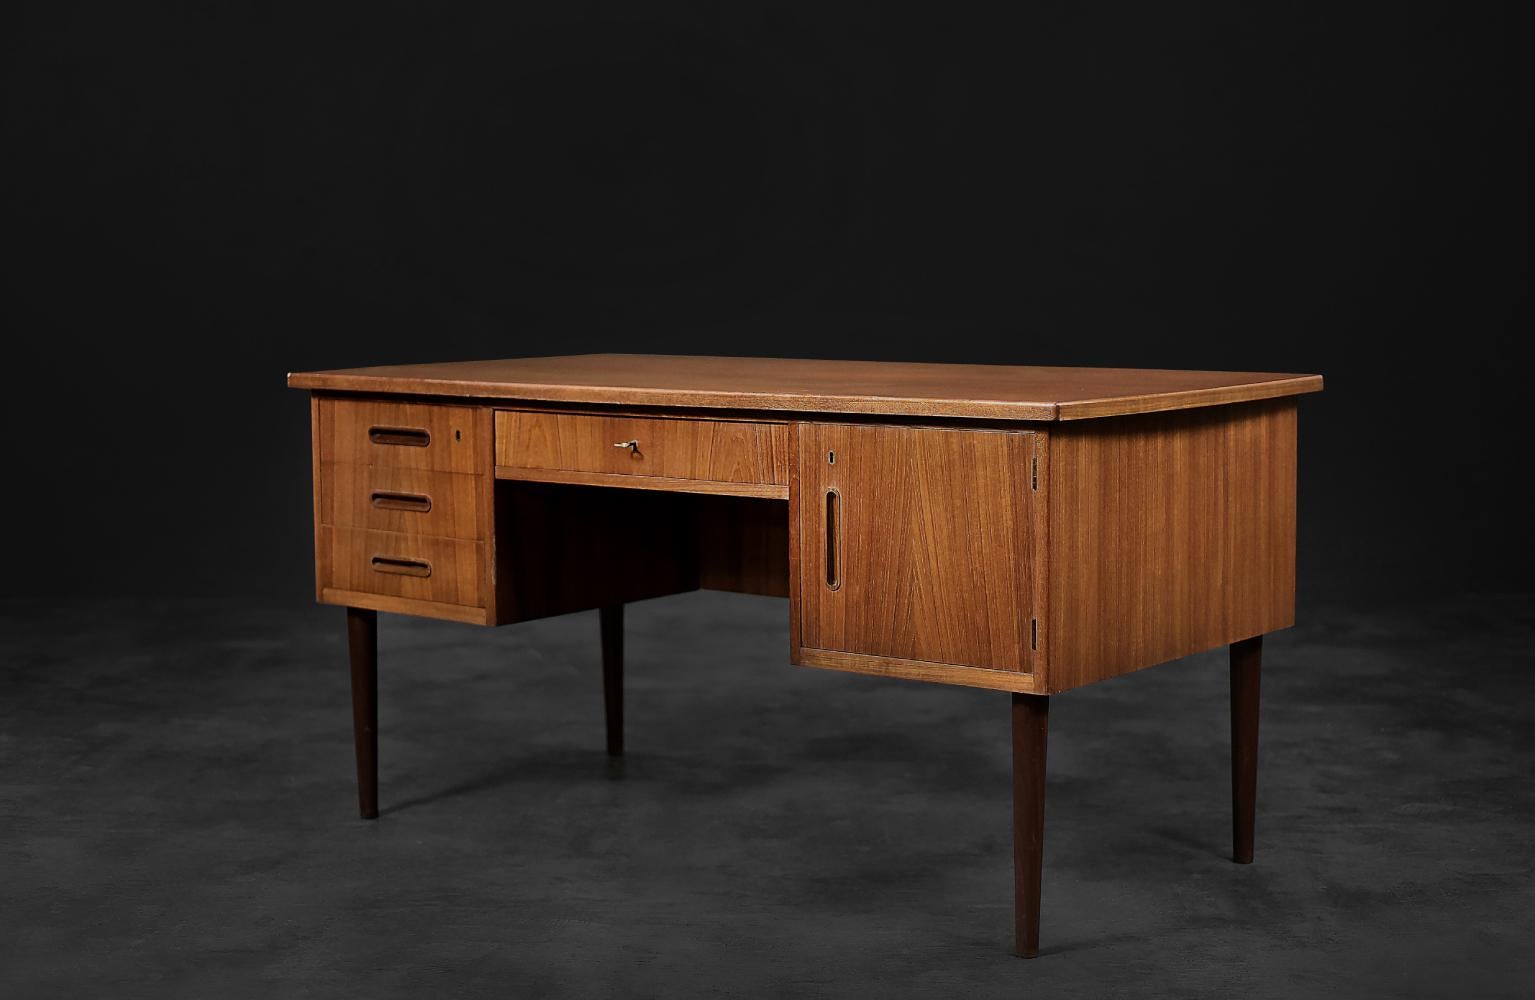 This large, bilateral desk was made in Denmark during the 1960s. It is finished in teak wood in a warm shade of brown. It has a balanced design, where style and functionality go hand in hand. The front consists of a block of three drawers, one